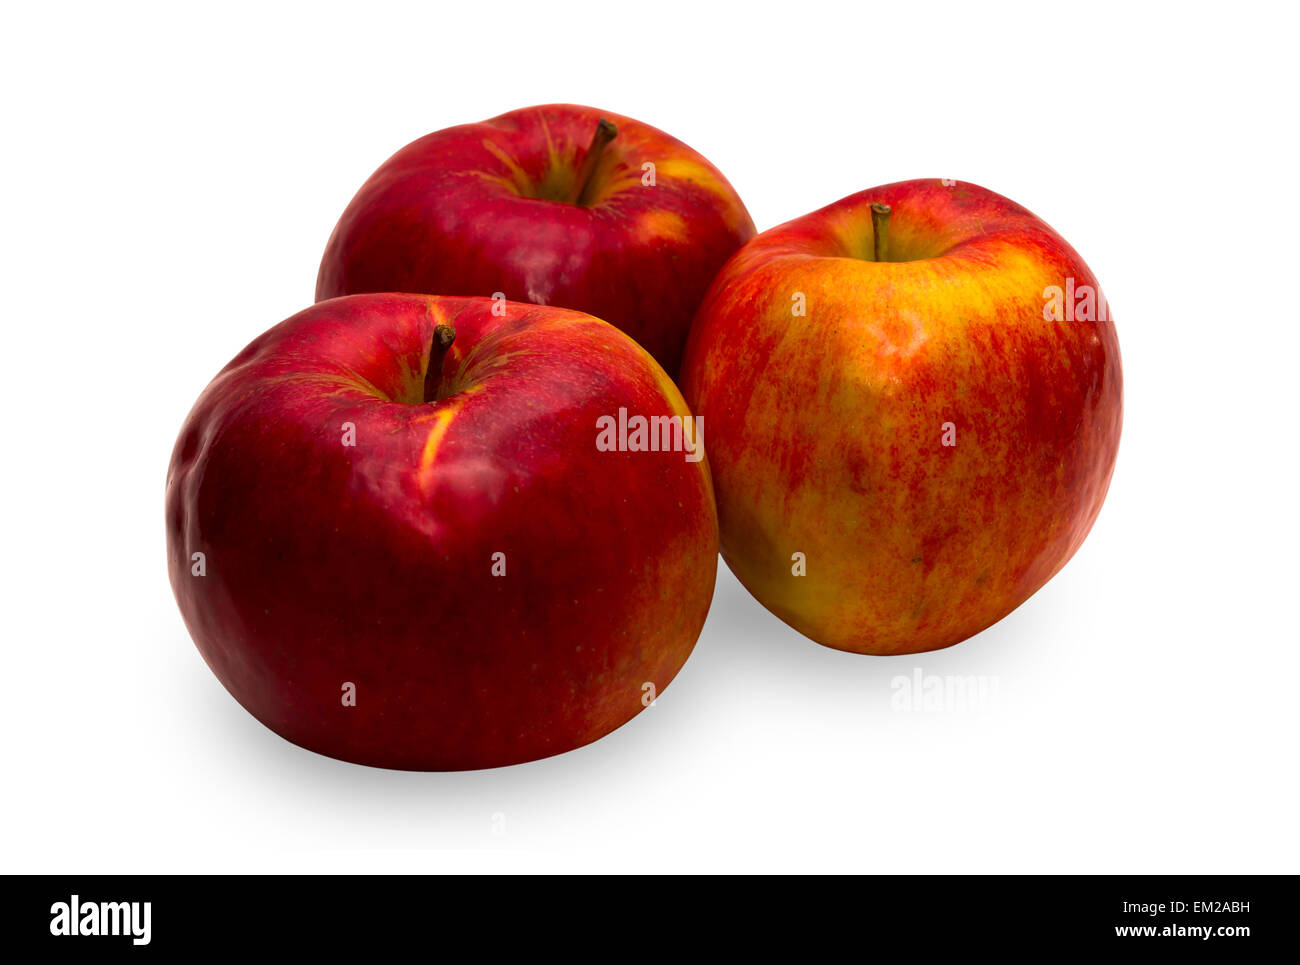 Three  Apple, as the three Jolly friend. Great mood, easy stomach and bright minds! Stock Photo